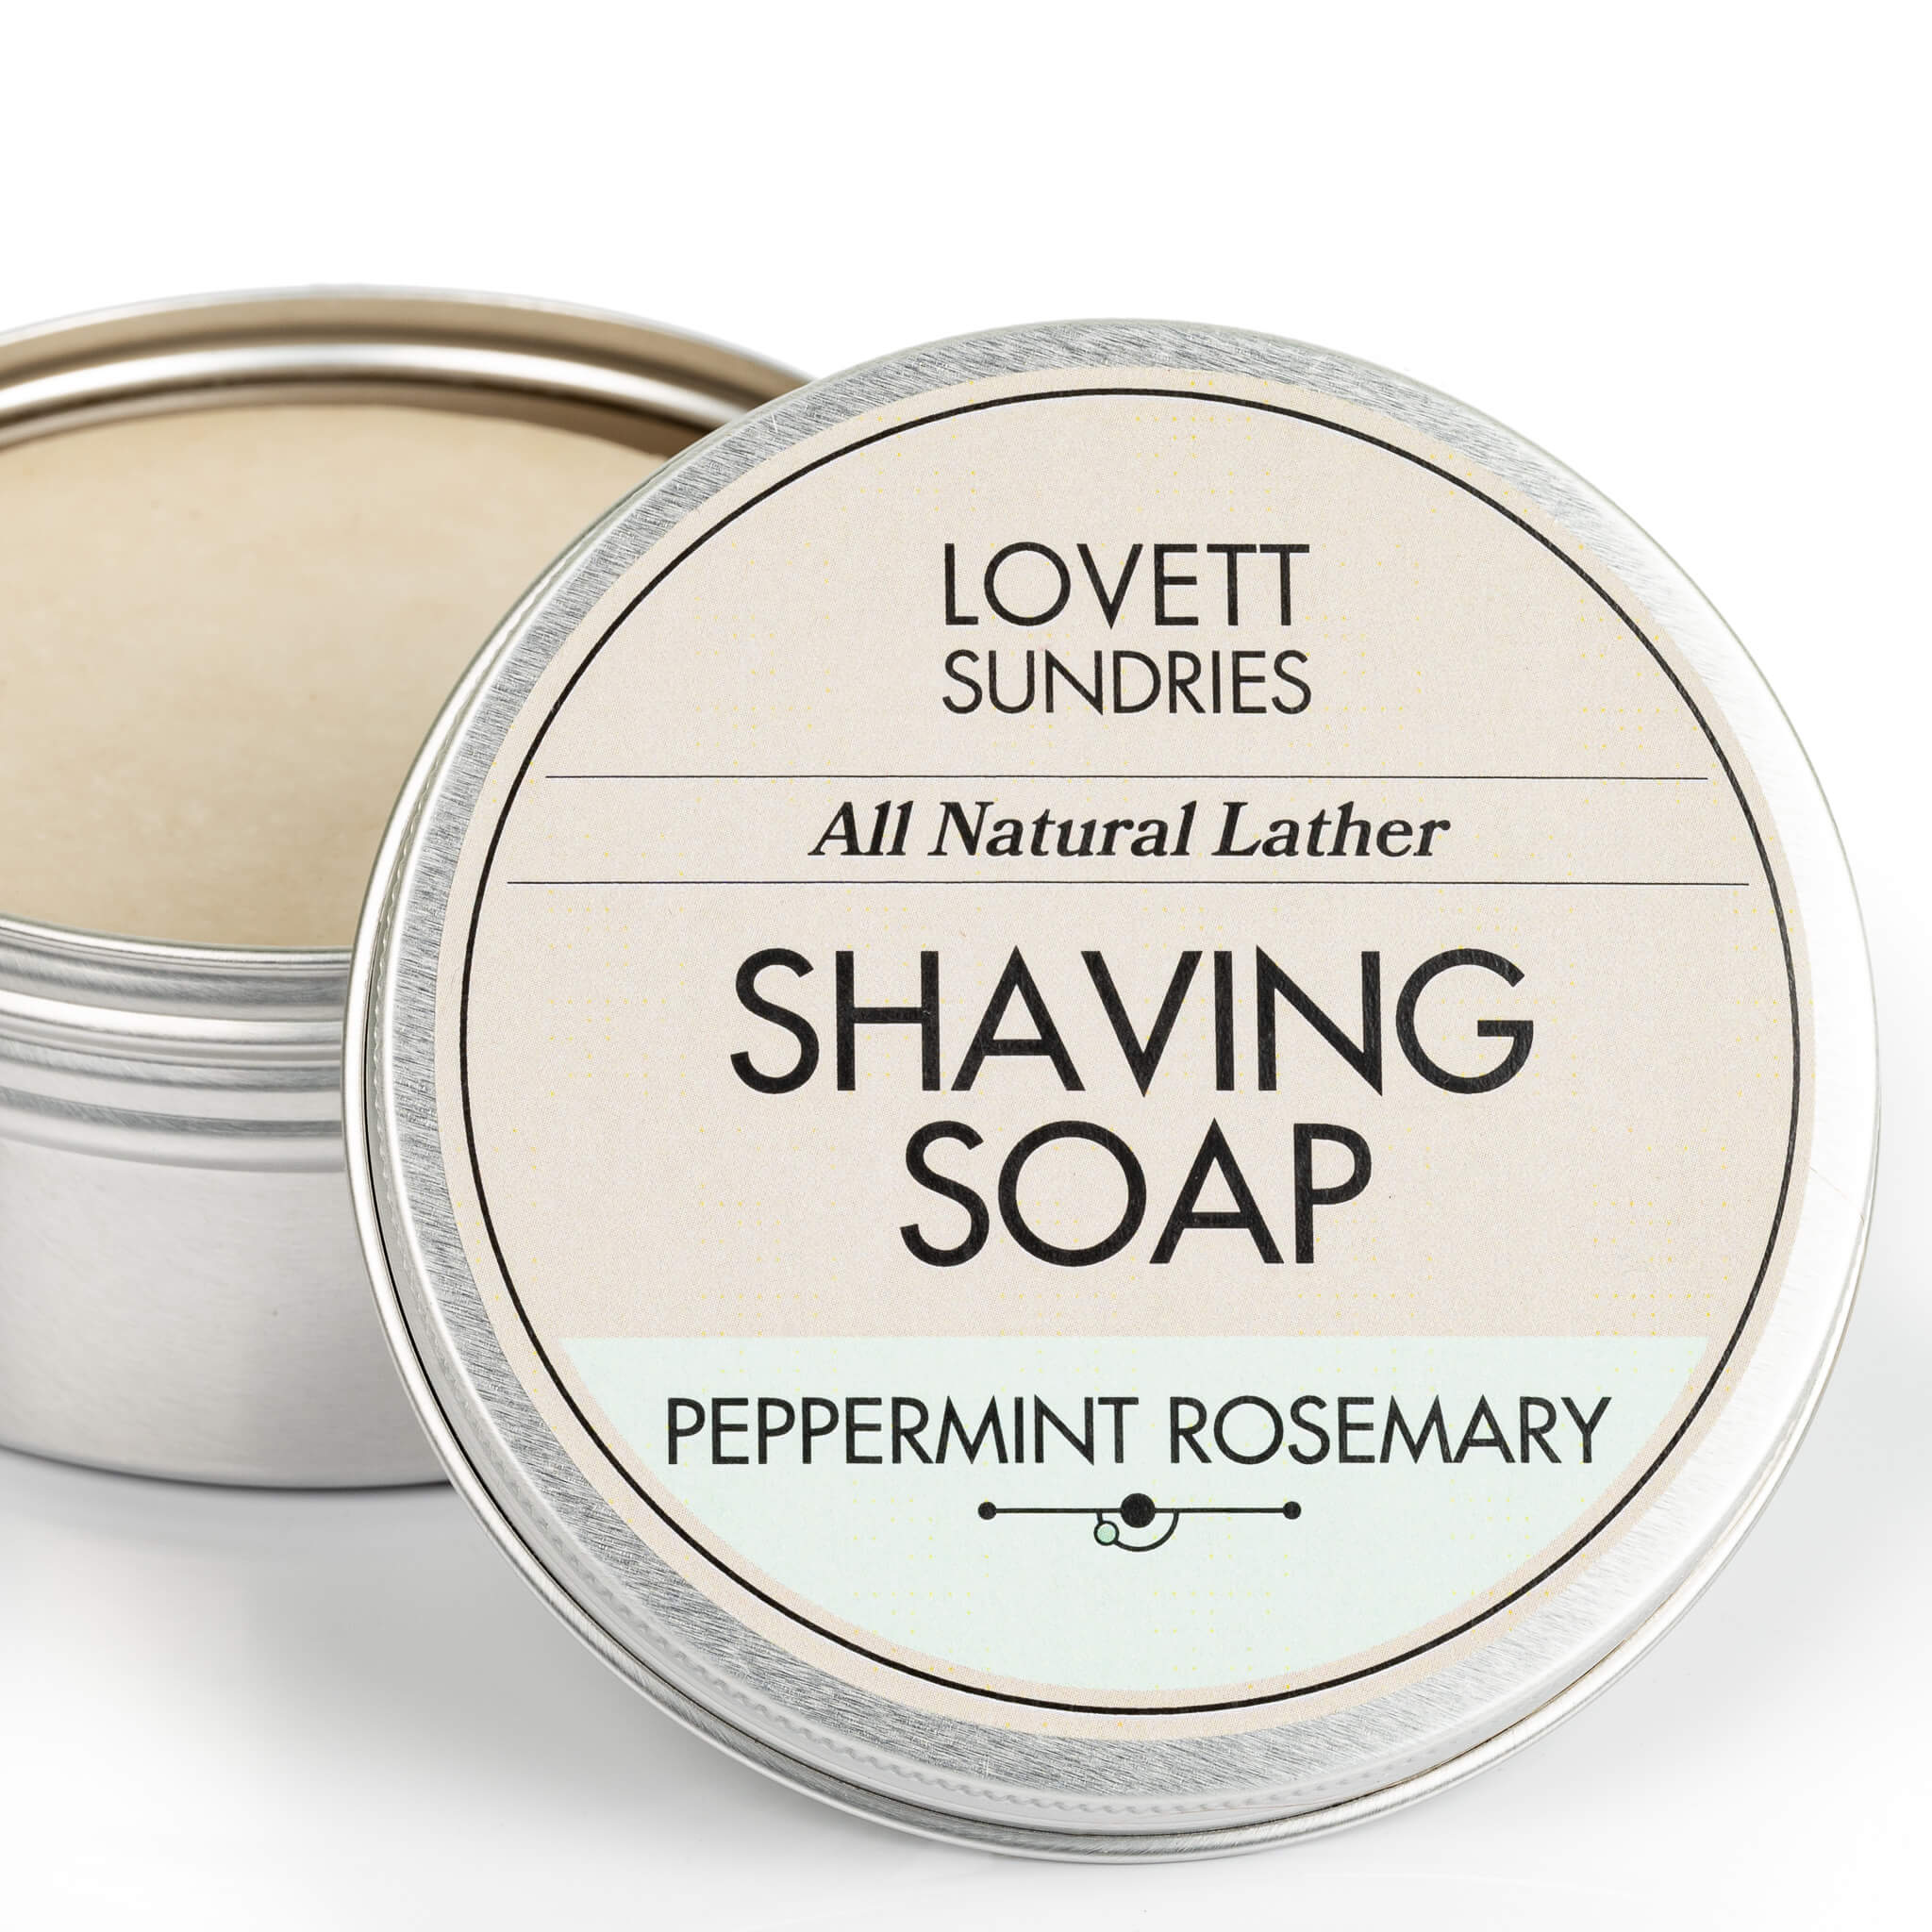 All natural good lathering peppermint rosemary shaving soapscented shaving soap in a recyclable aluminum tin.